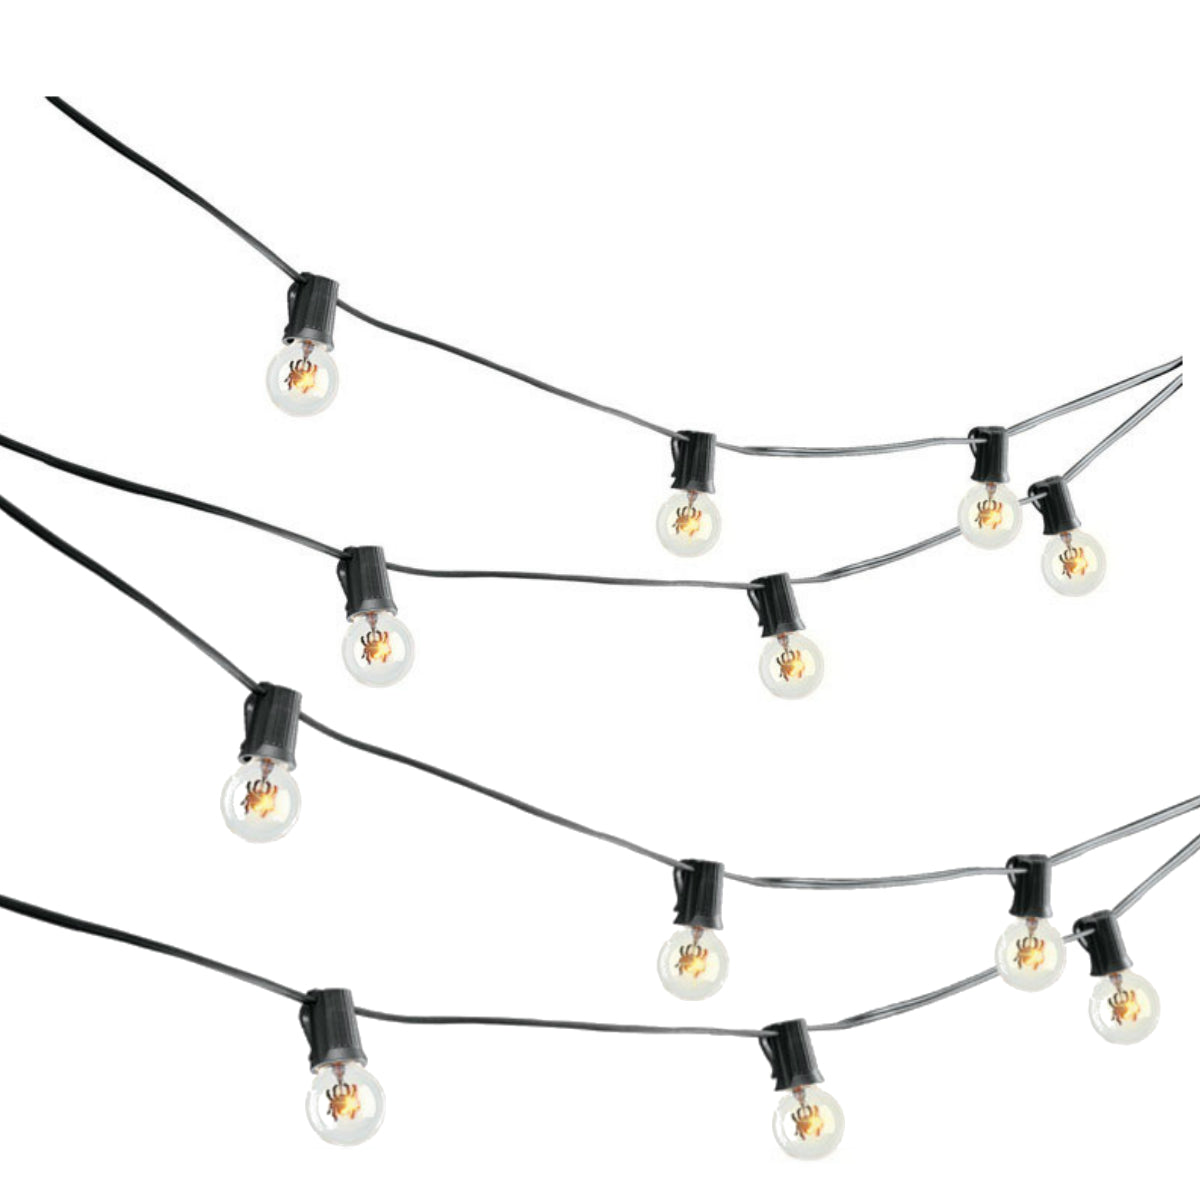 buy halloween lights at cheap rate in bulk. wholesale & retail holiday gift items store.